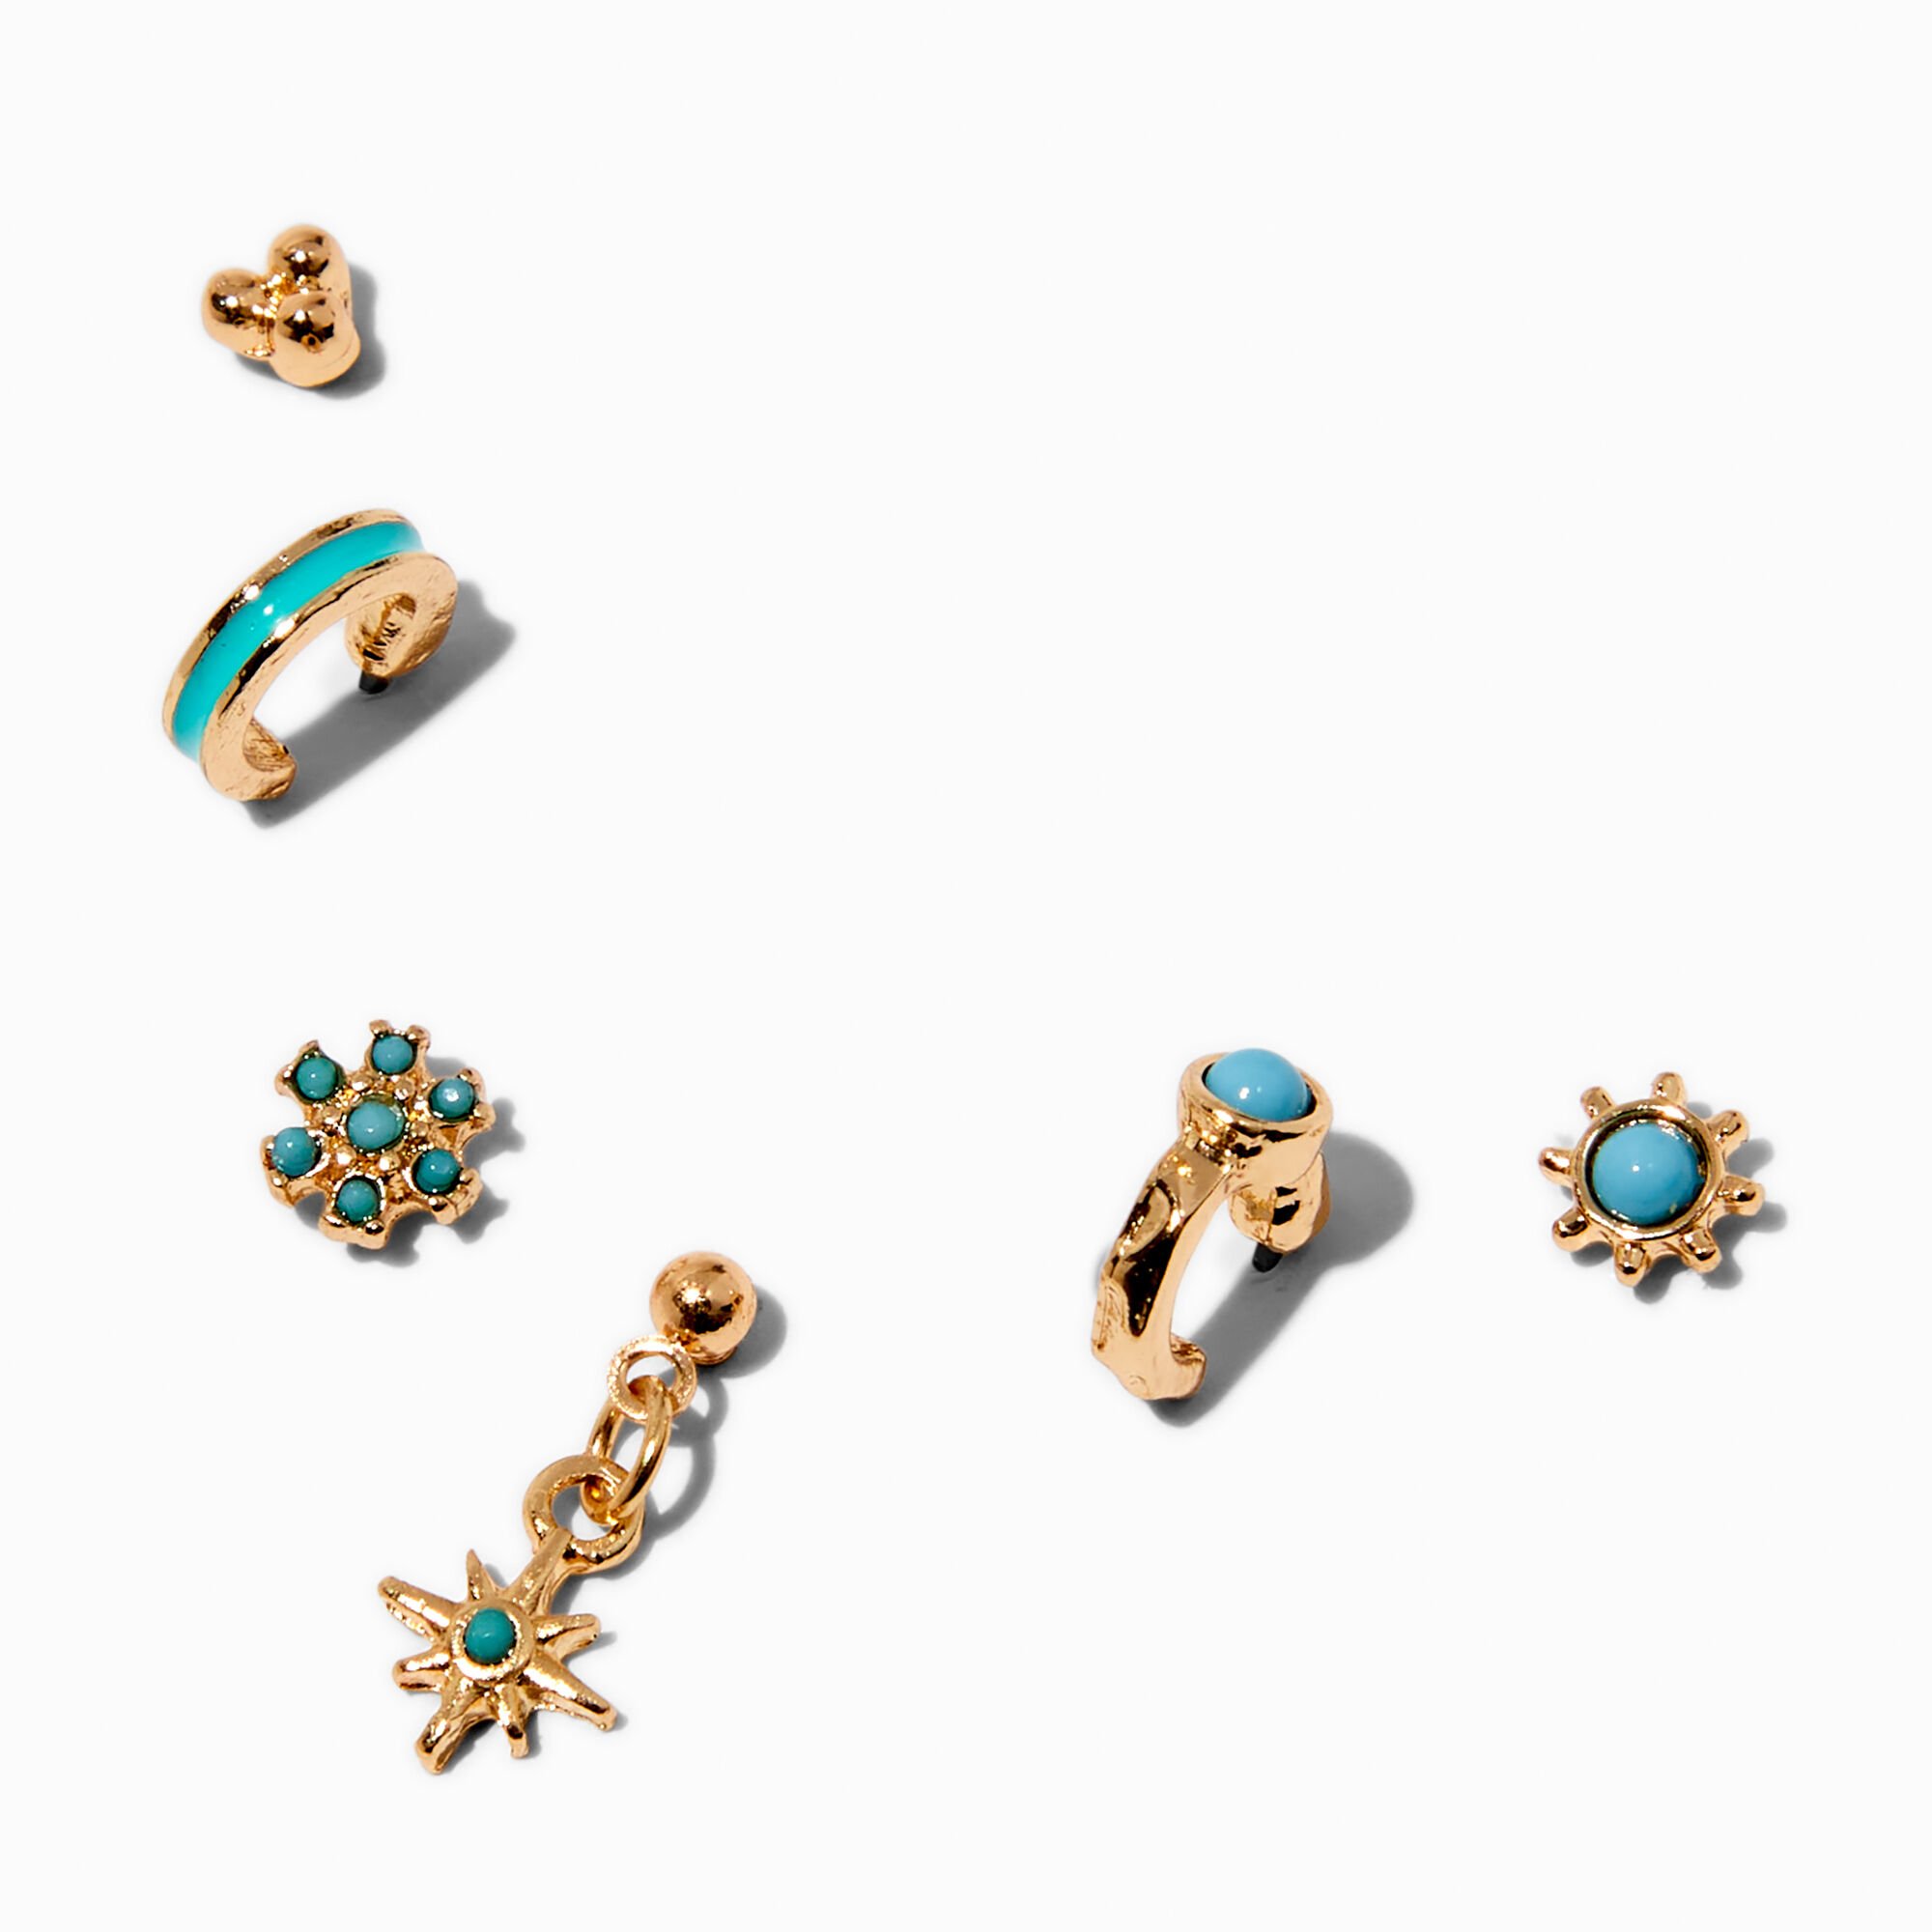 View Claires GoldTone Mixed Earring Stack 3 Pack Turquoise information